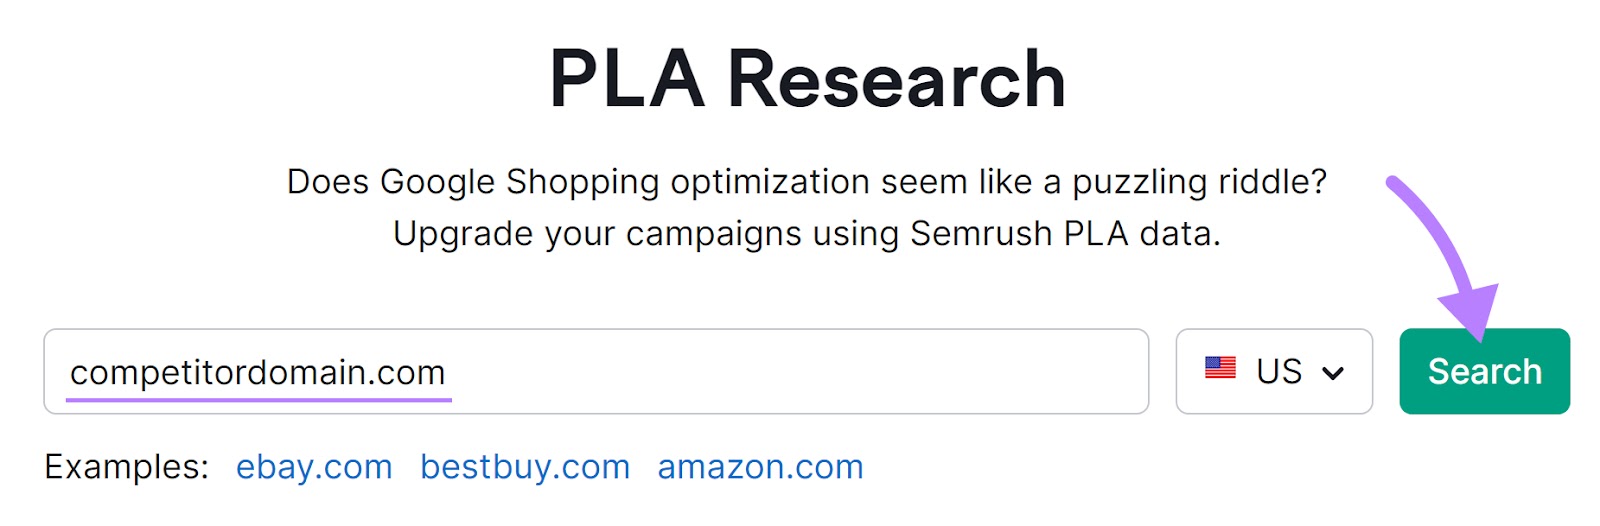 PLA Research tool search bar